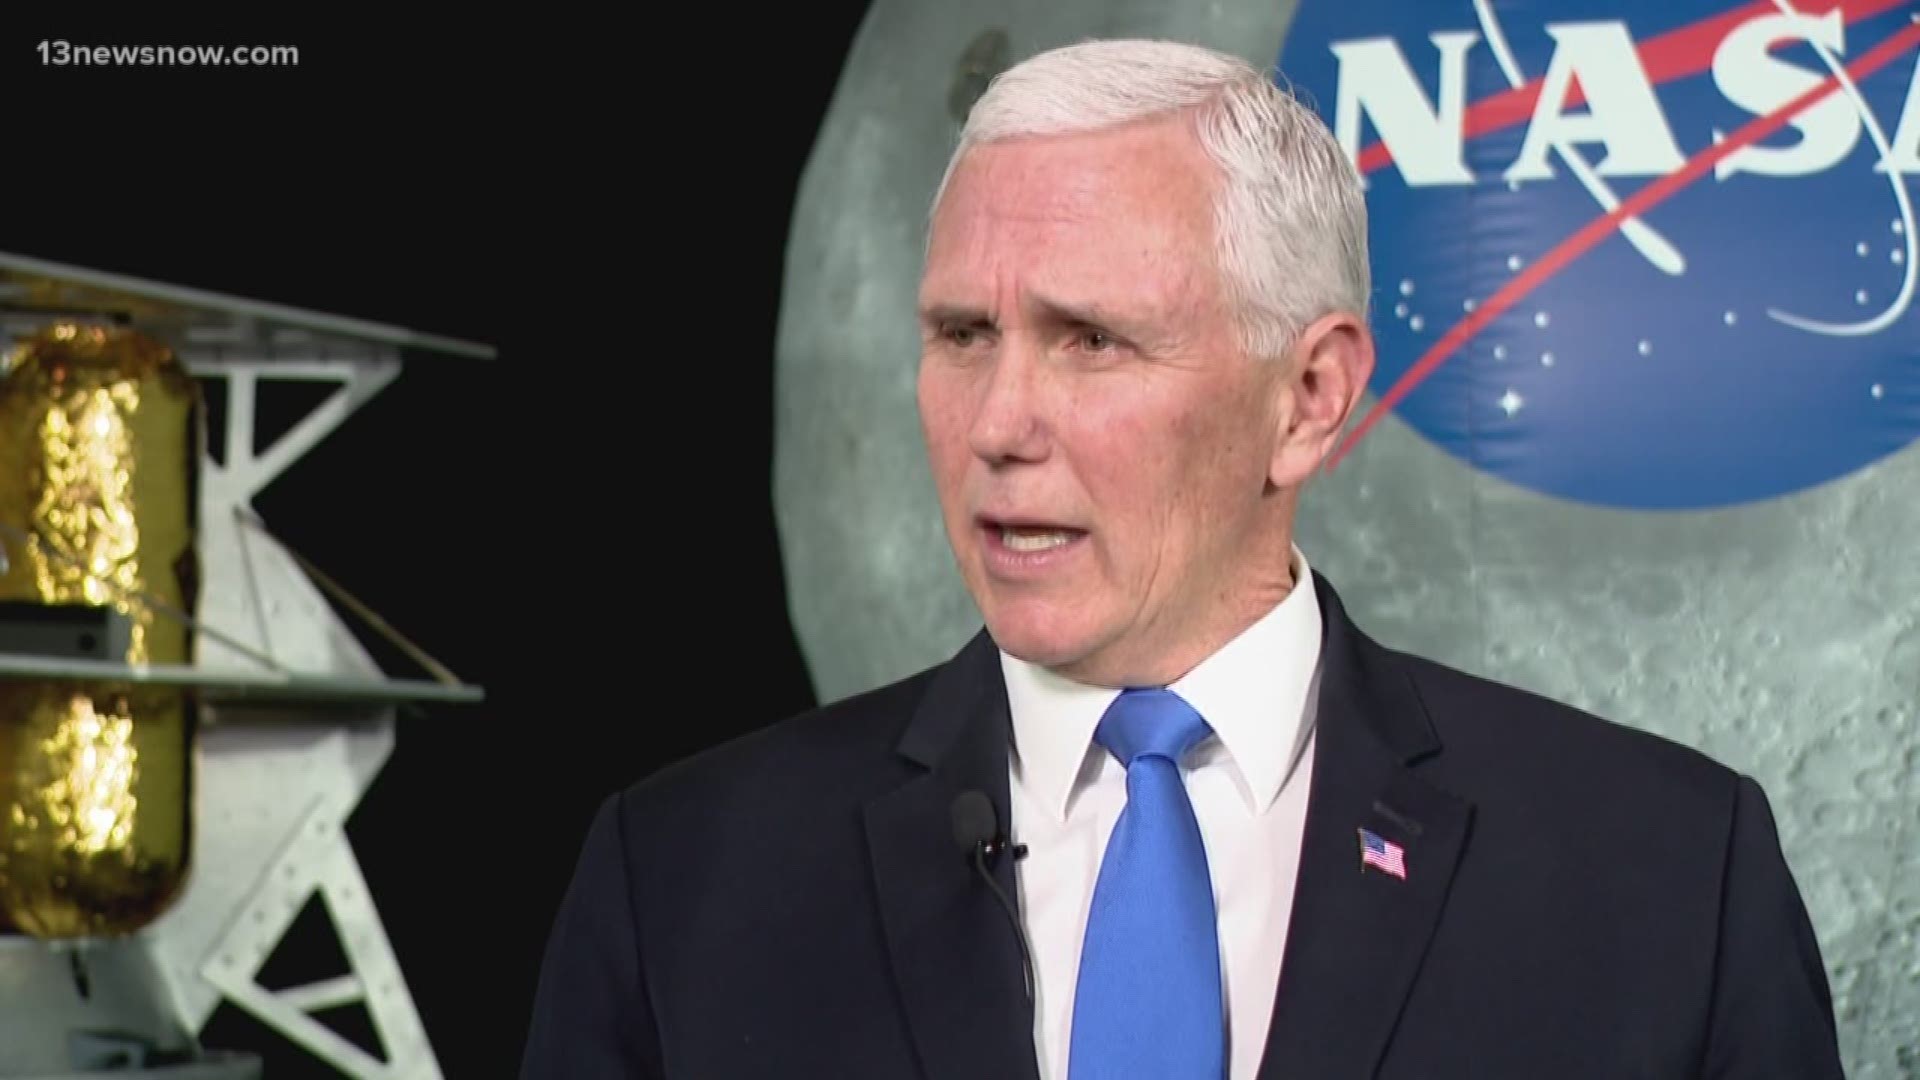 Vice President Mike Pence's schedule included stops at NASA Langley, Hampton University, and Virginia Beach to talk to Navy SEALs.